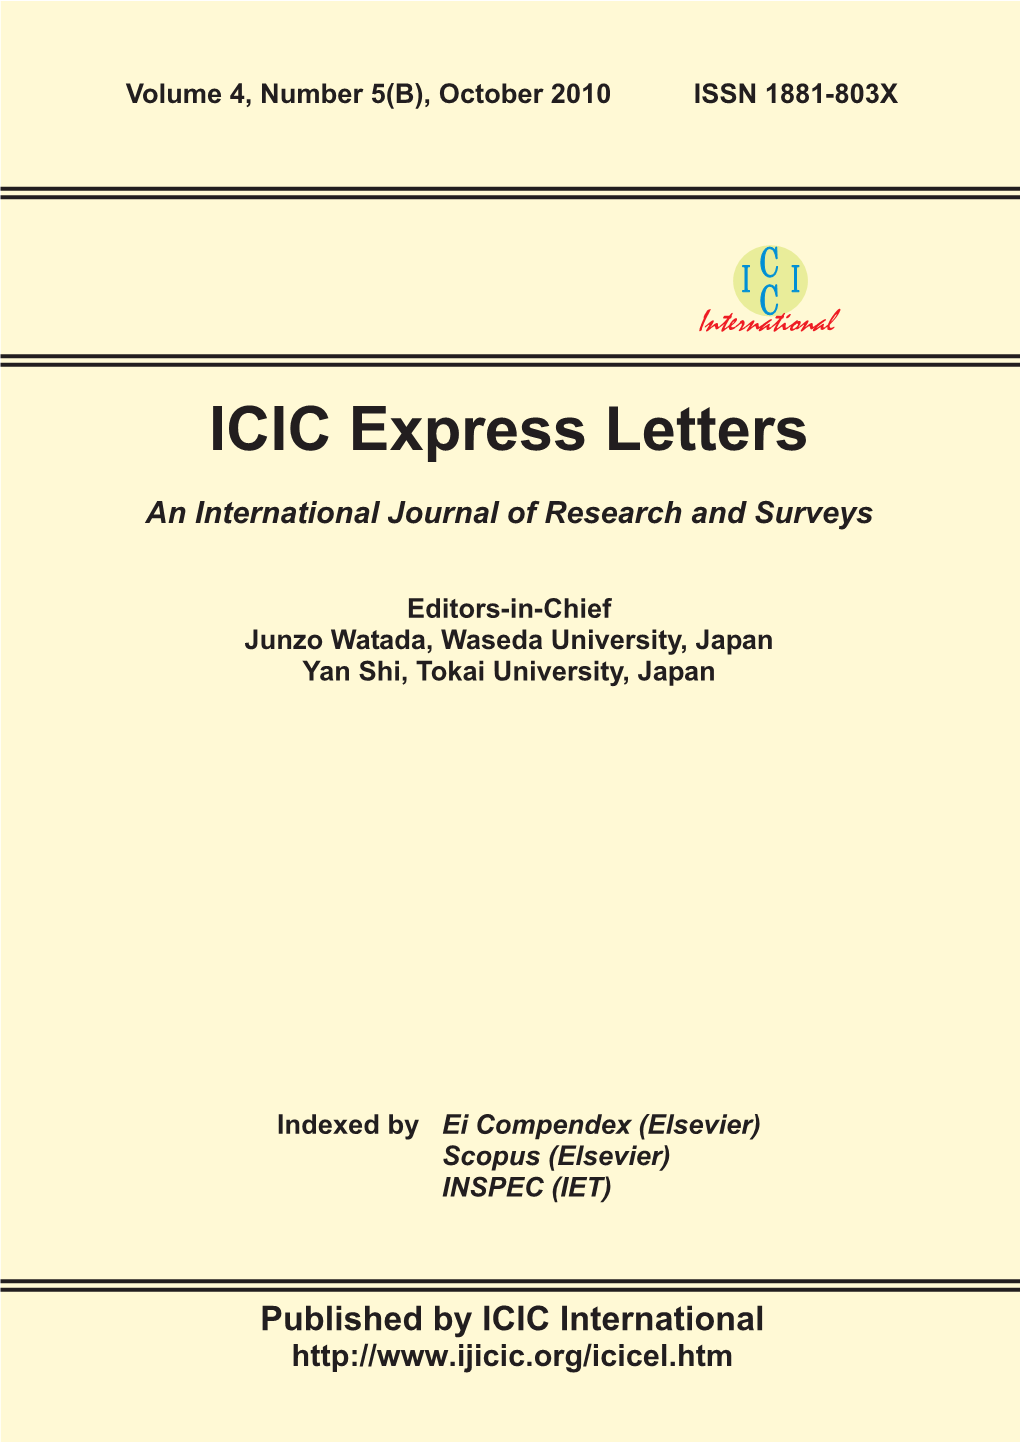 ICIC Express Letters